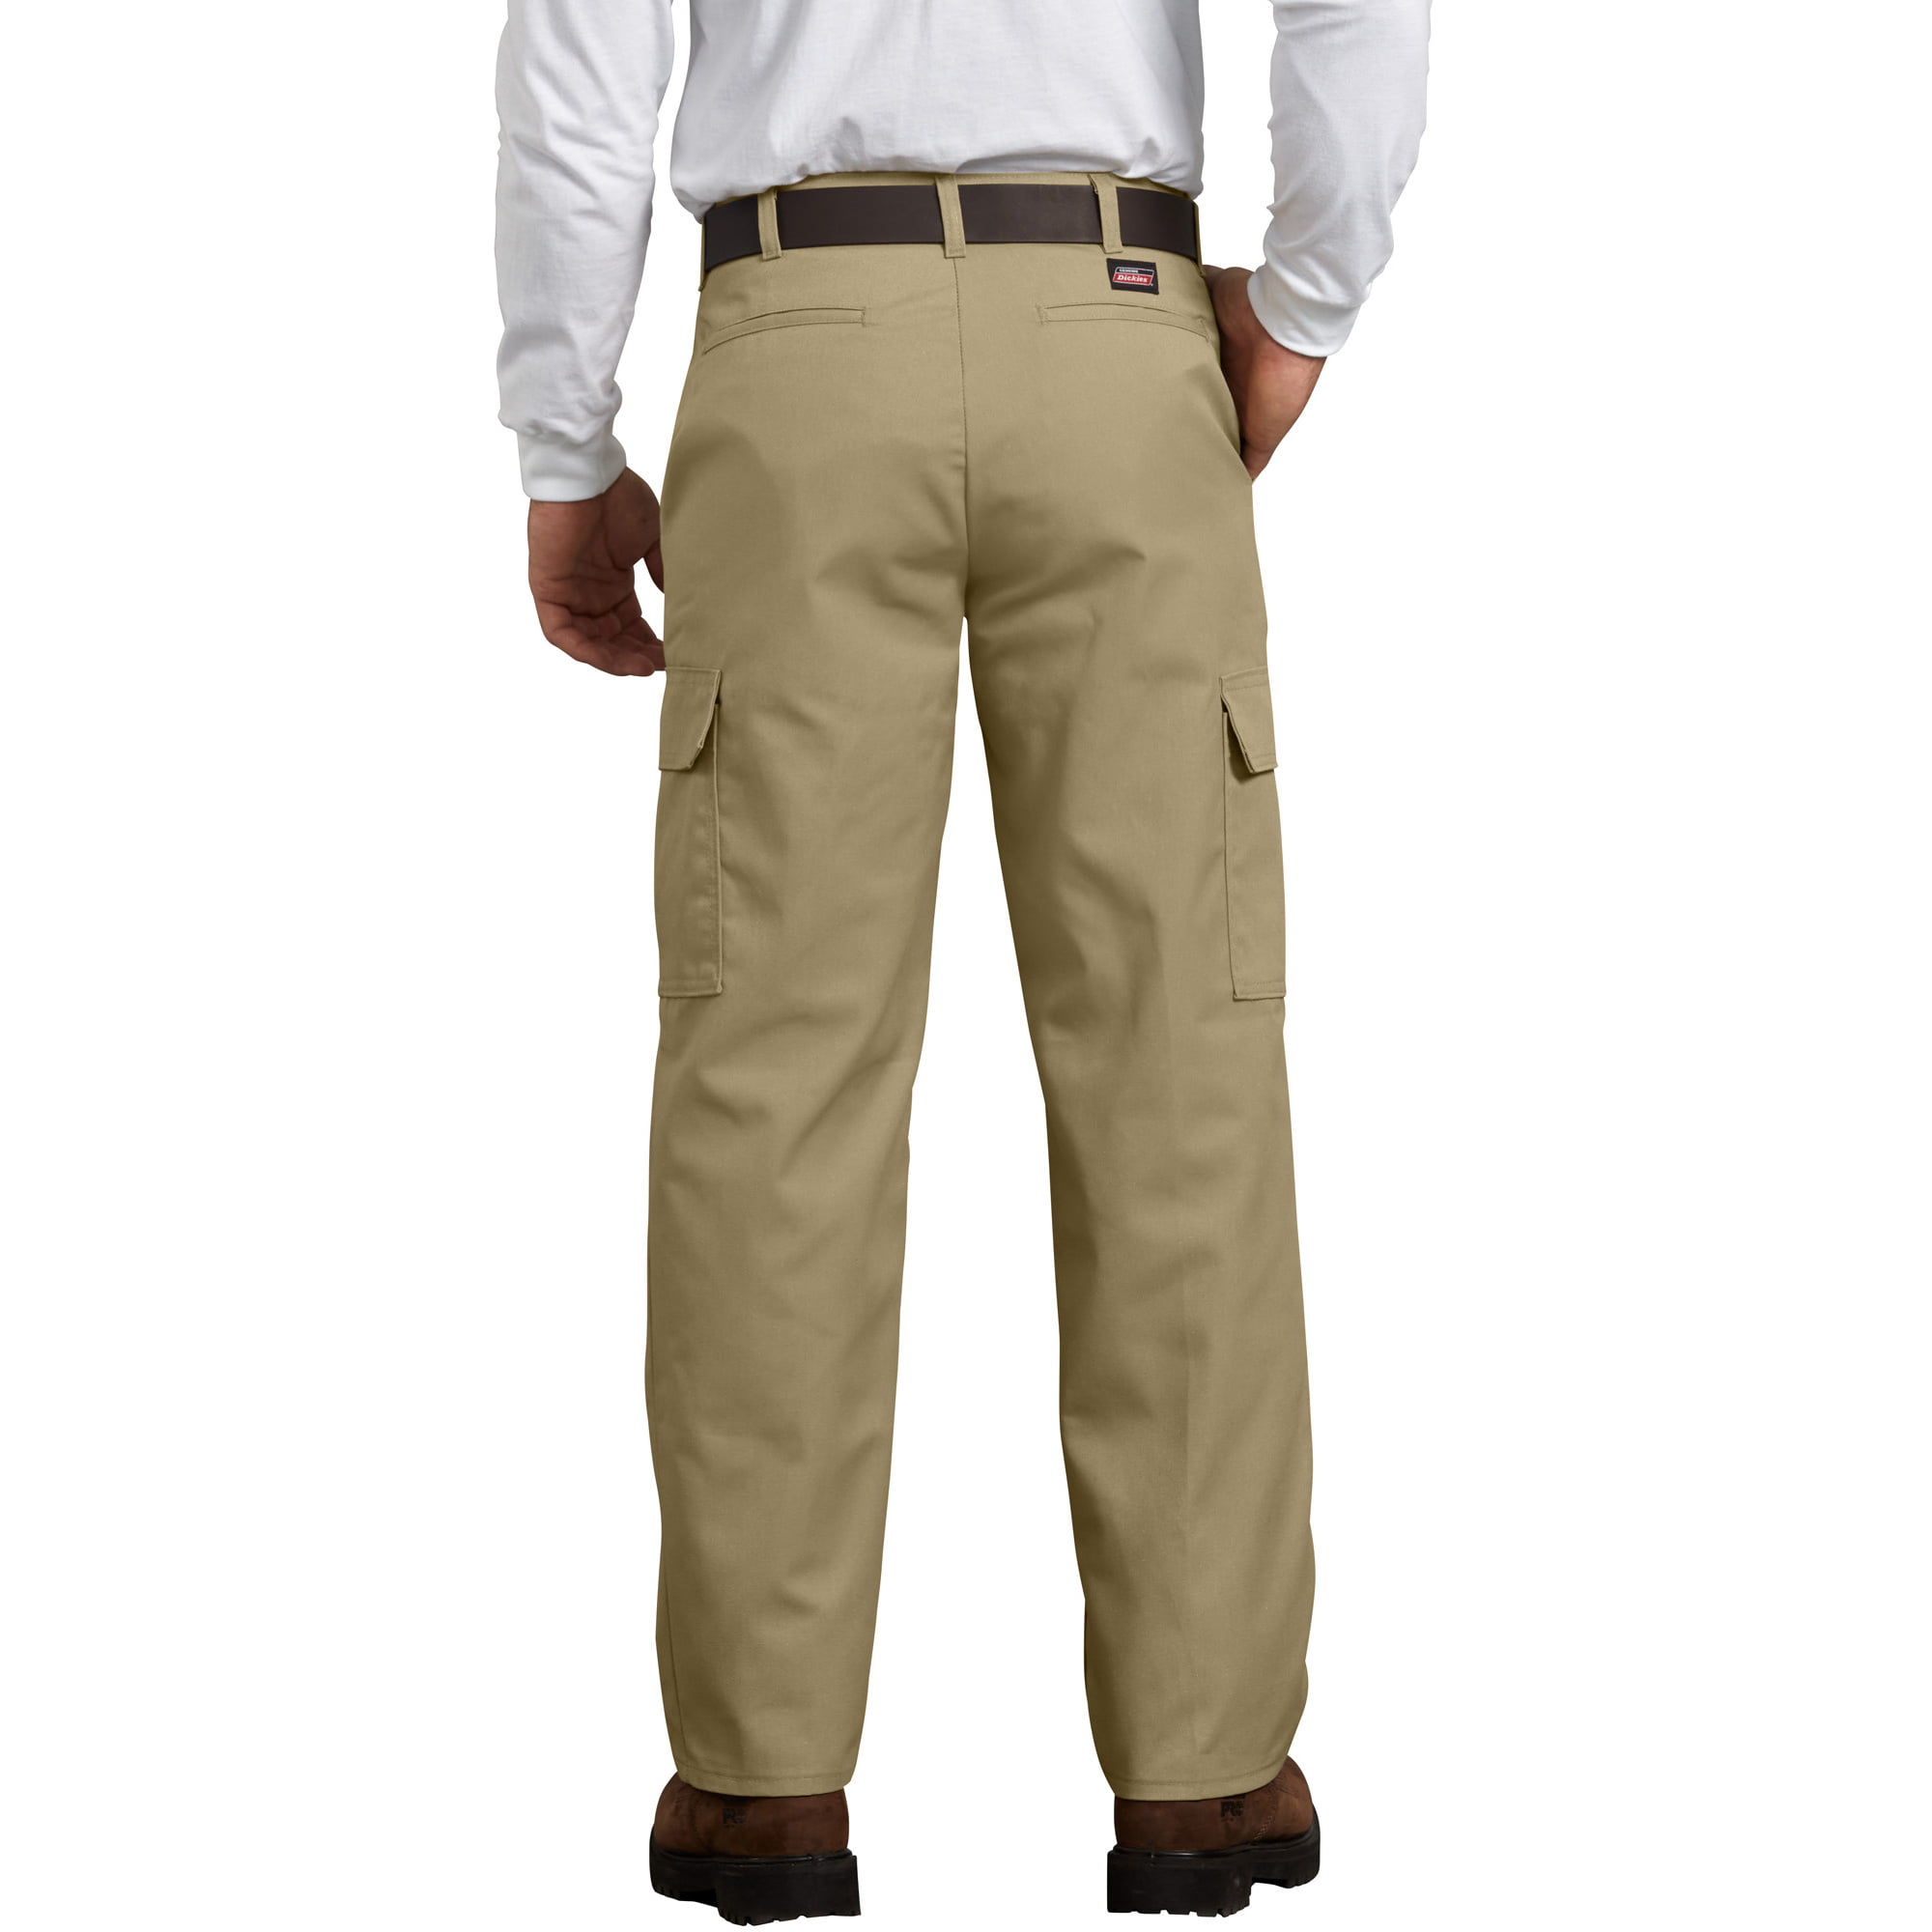 Genuine Dickies Men's and Men's Relaxed Fit Flat Front Cargo Pant